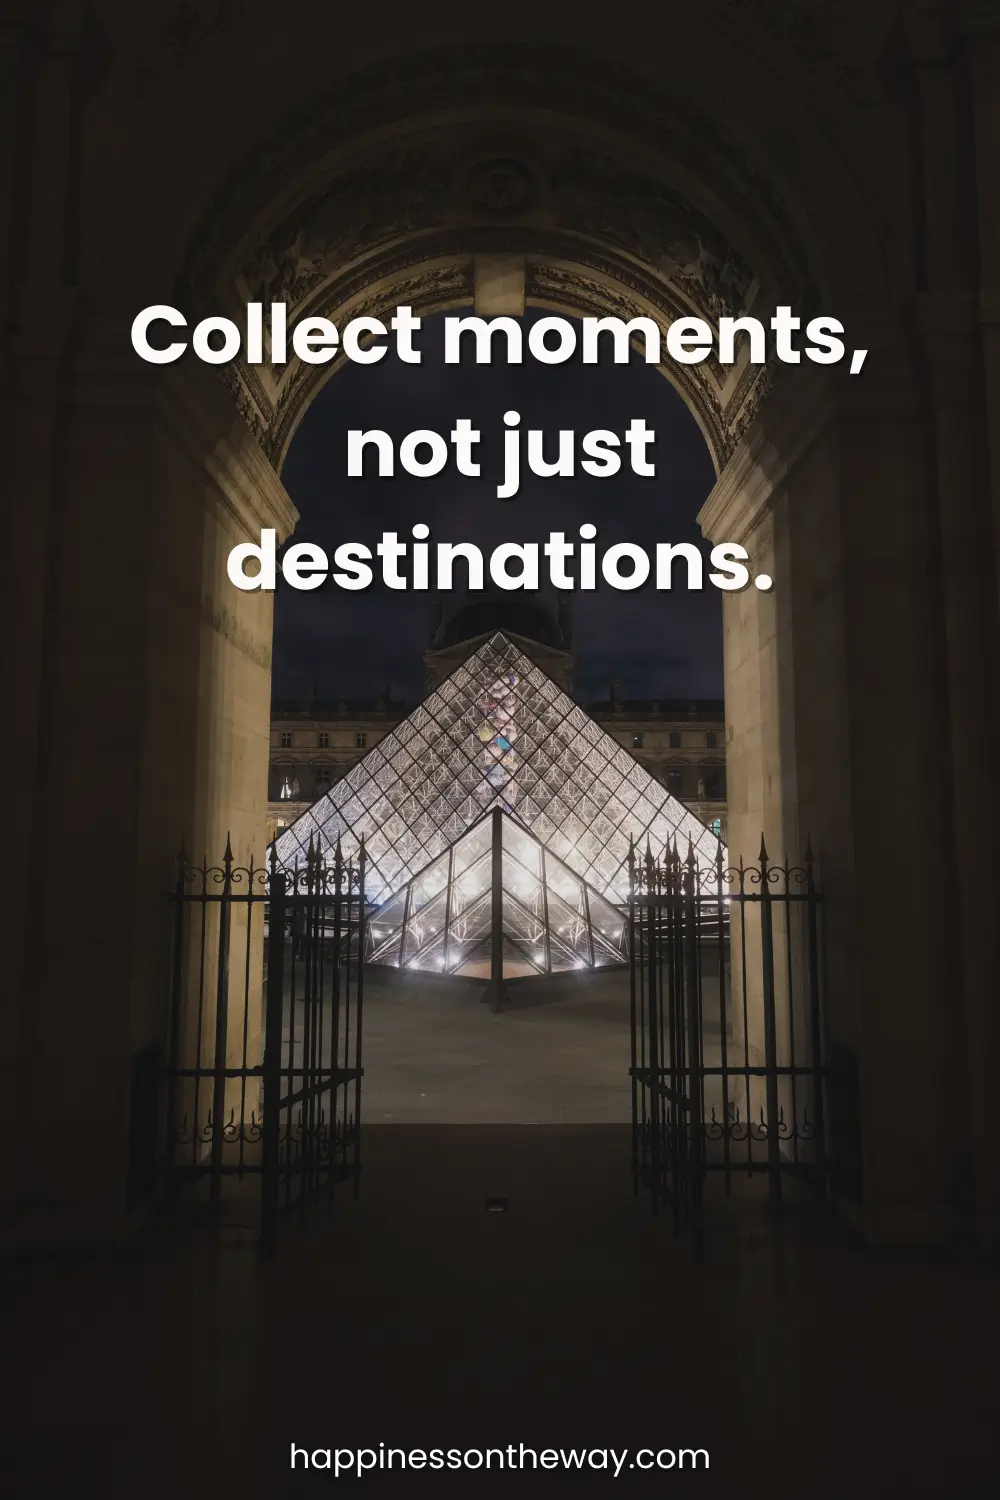 Louvre at night with an inspiring slow travel quote: Collect moments, not just destinations.